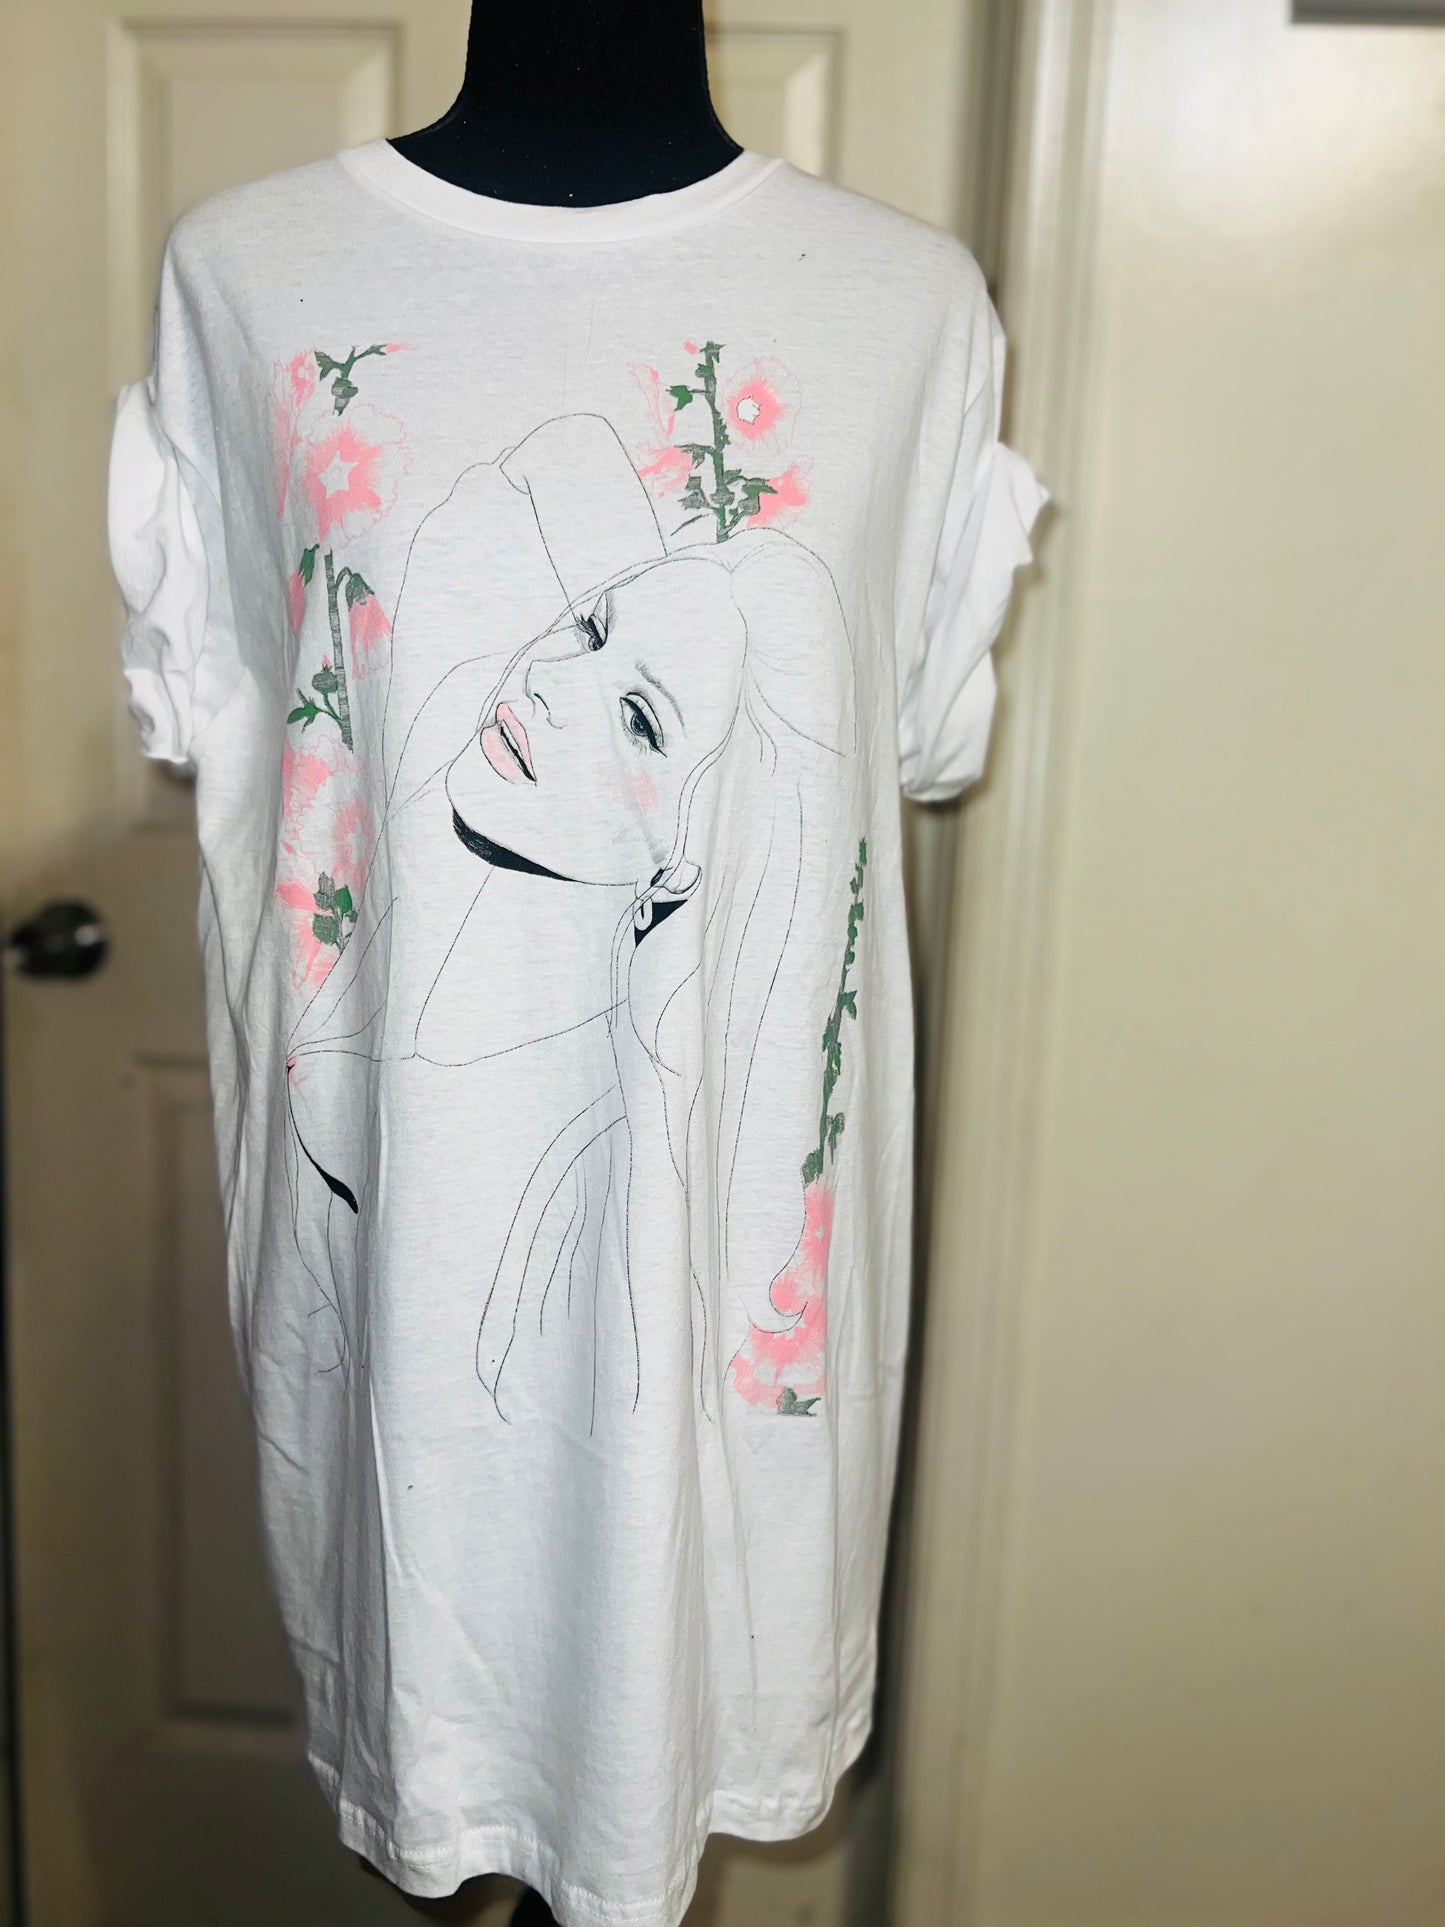 Lana Del Rey Ocean Blvd Double Sided Distressed Tee